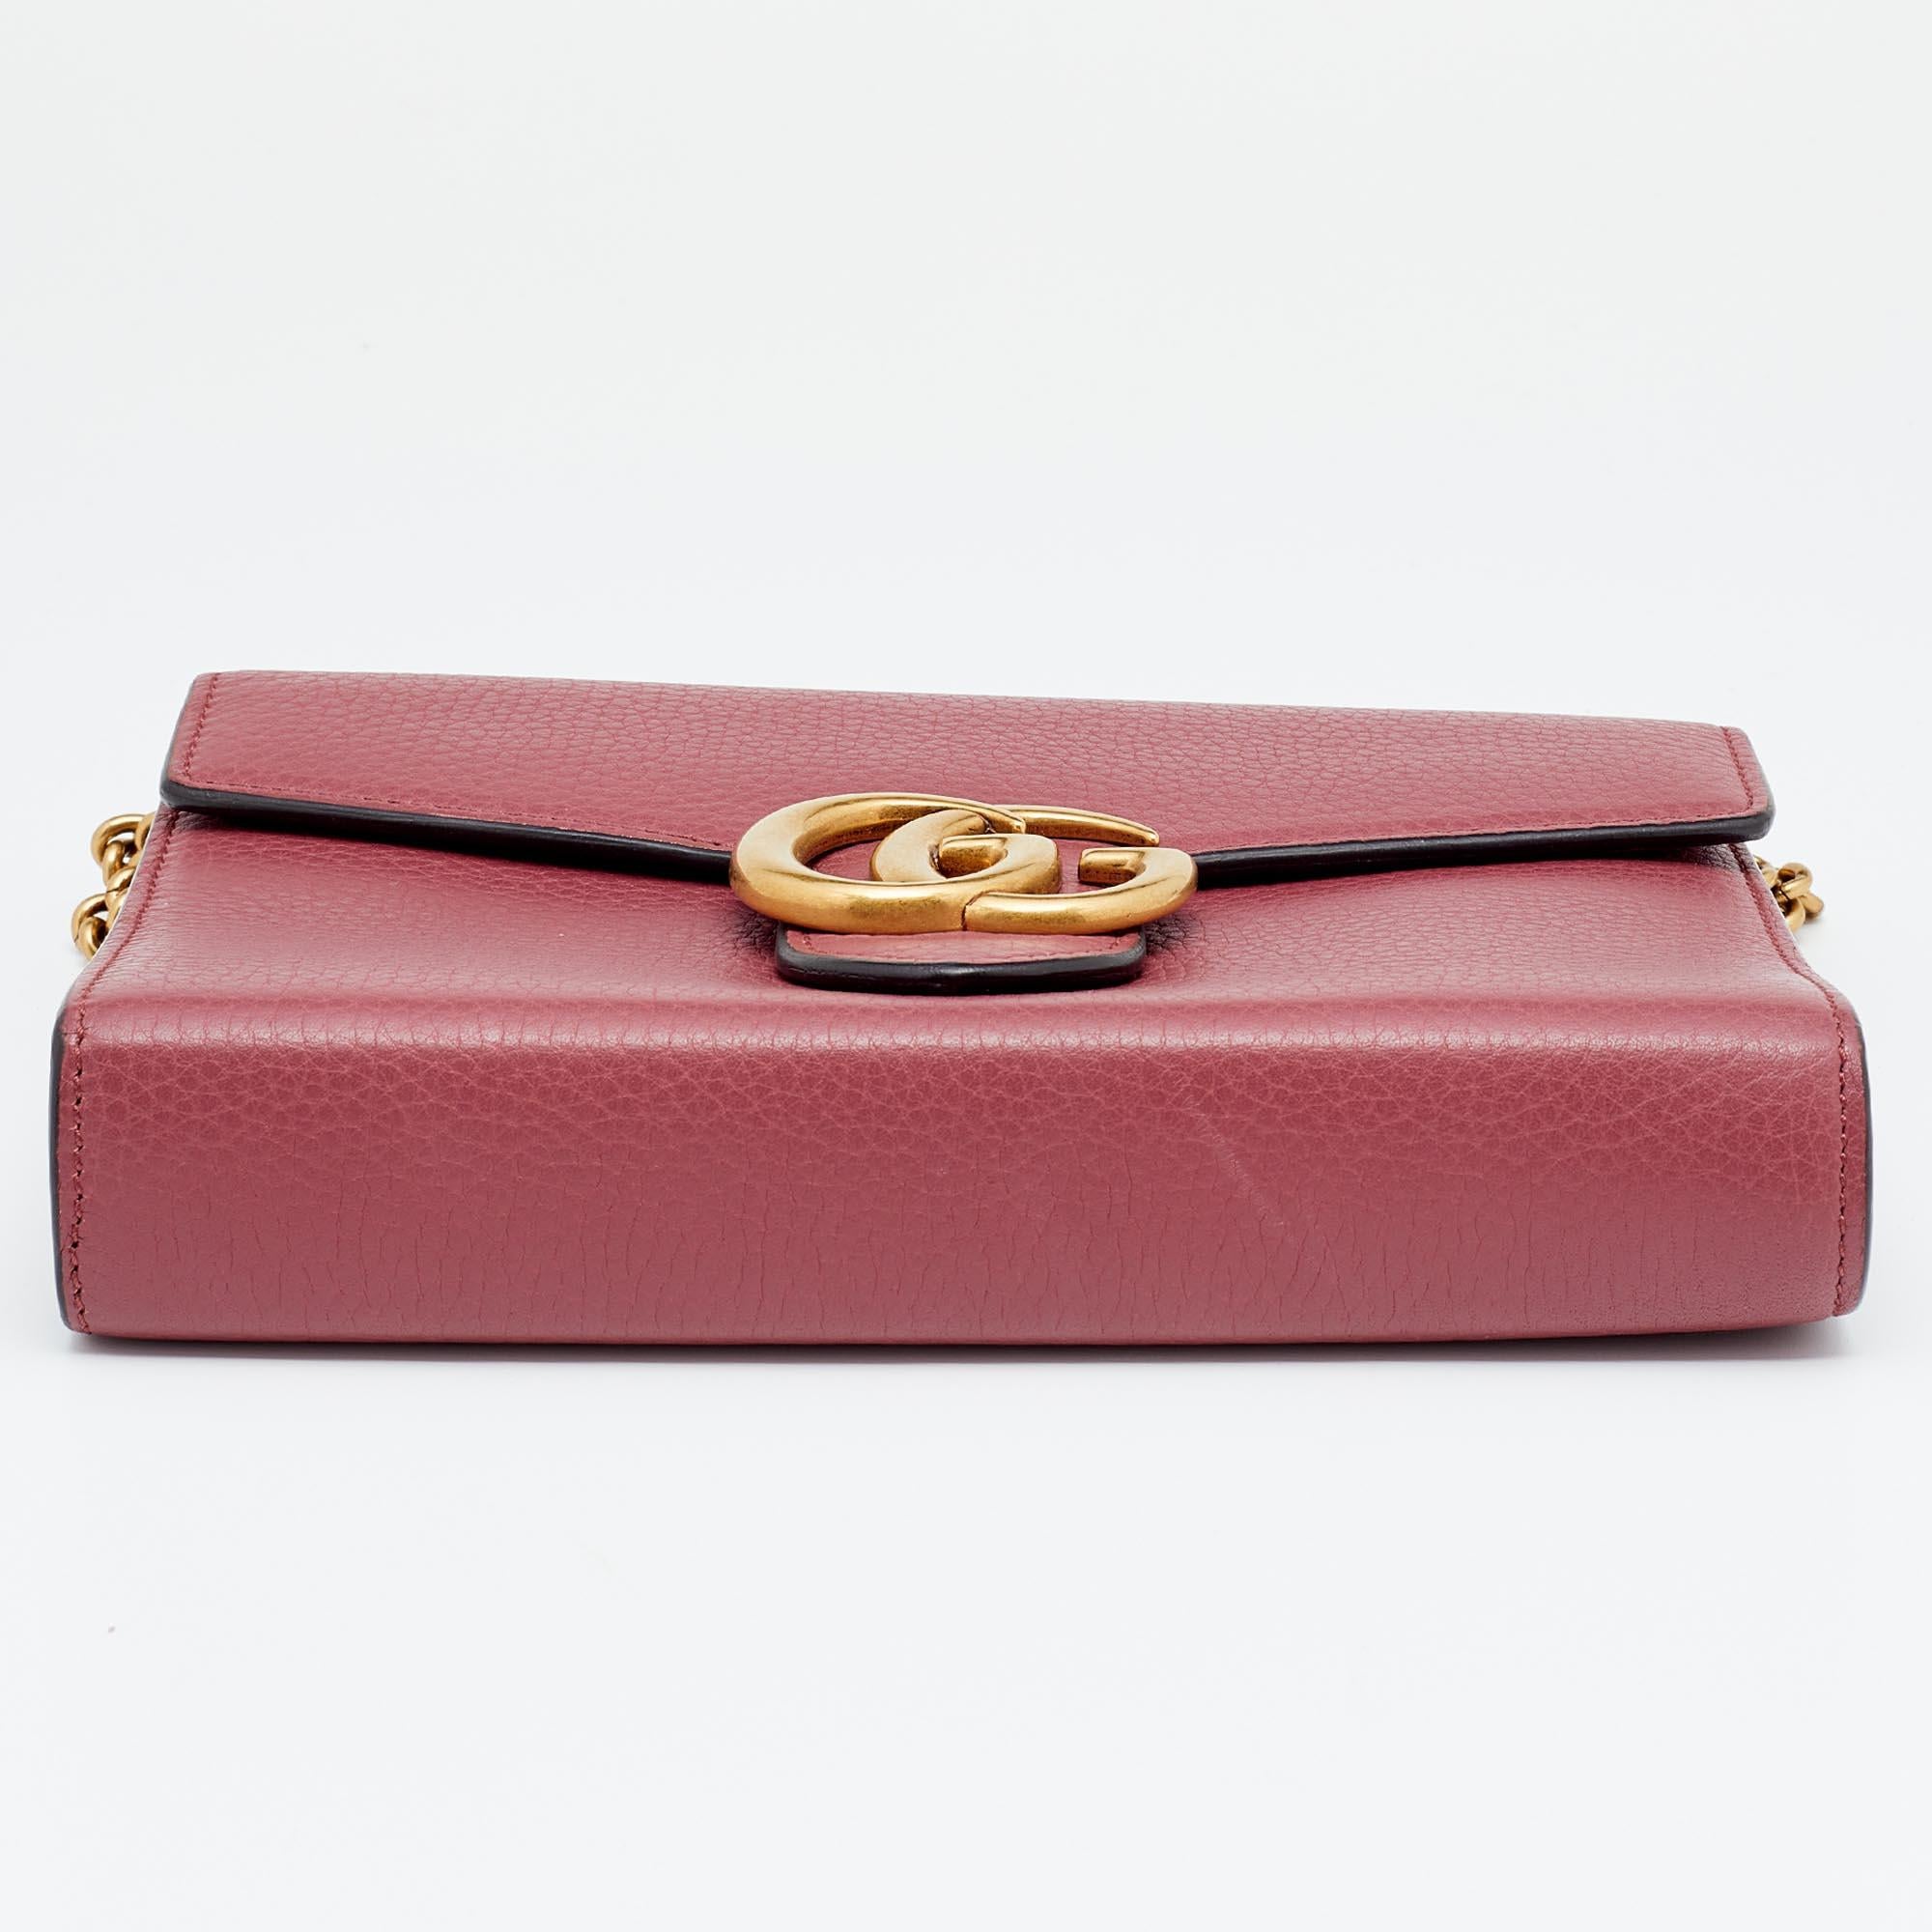 gucci marmont wallet on chain pink